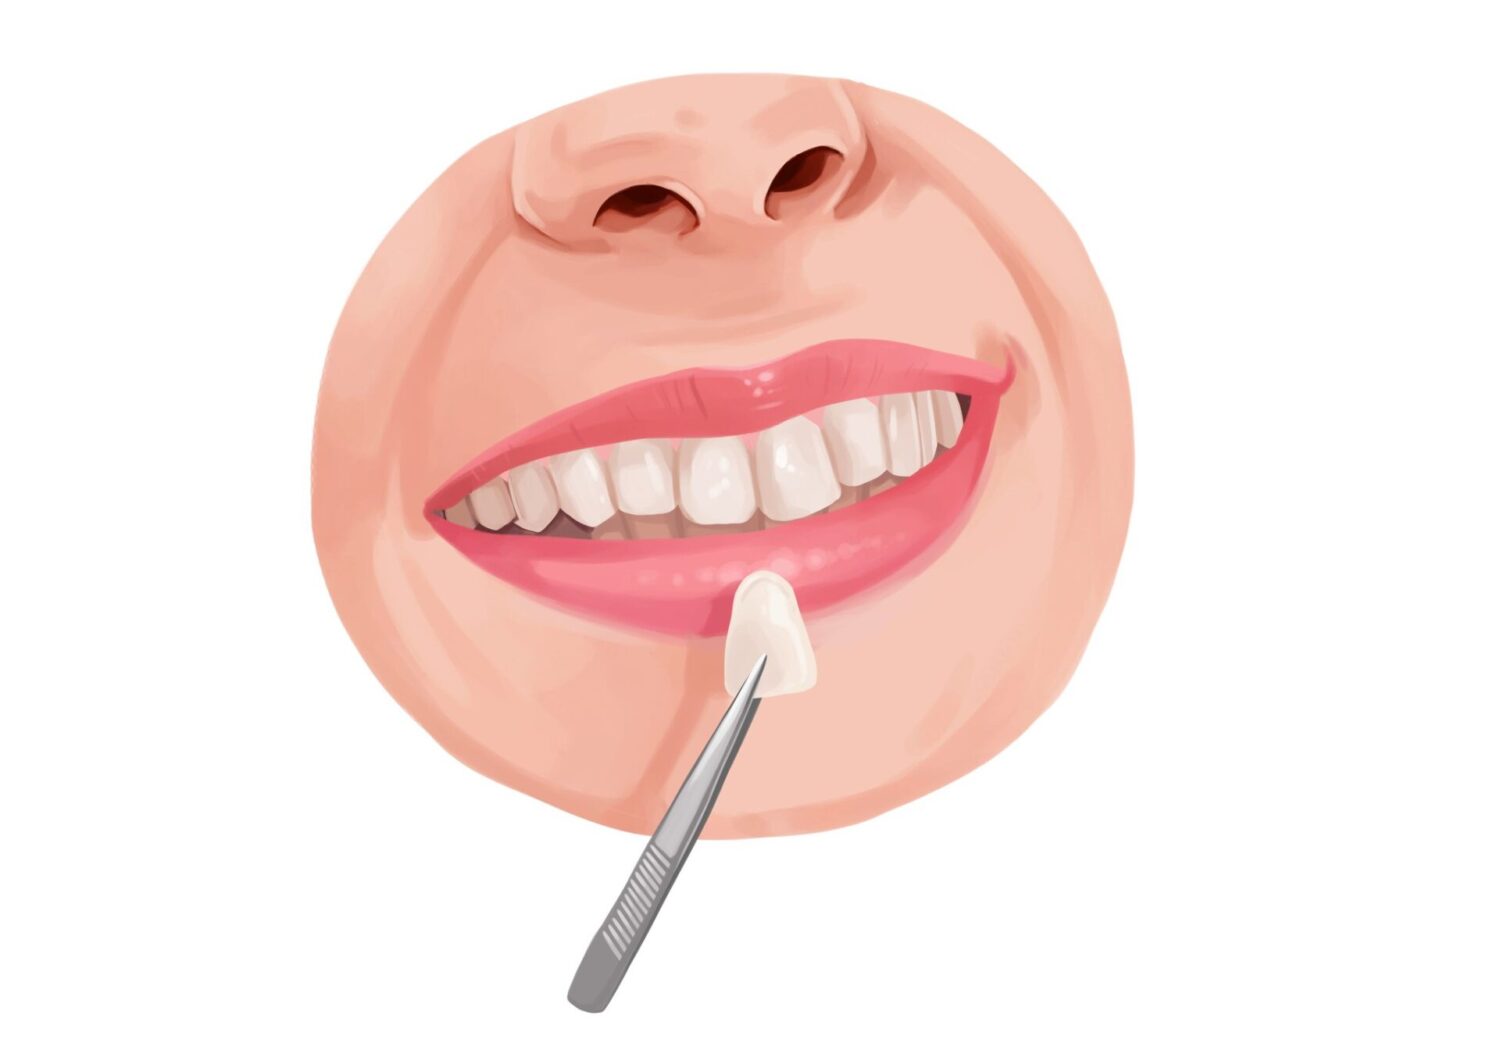 closeup illustration of a woman's mouth with a dental veneer being held up next to her teeth